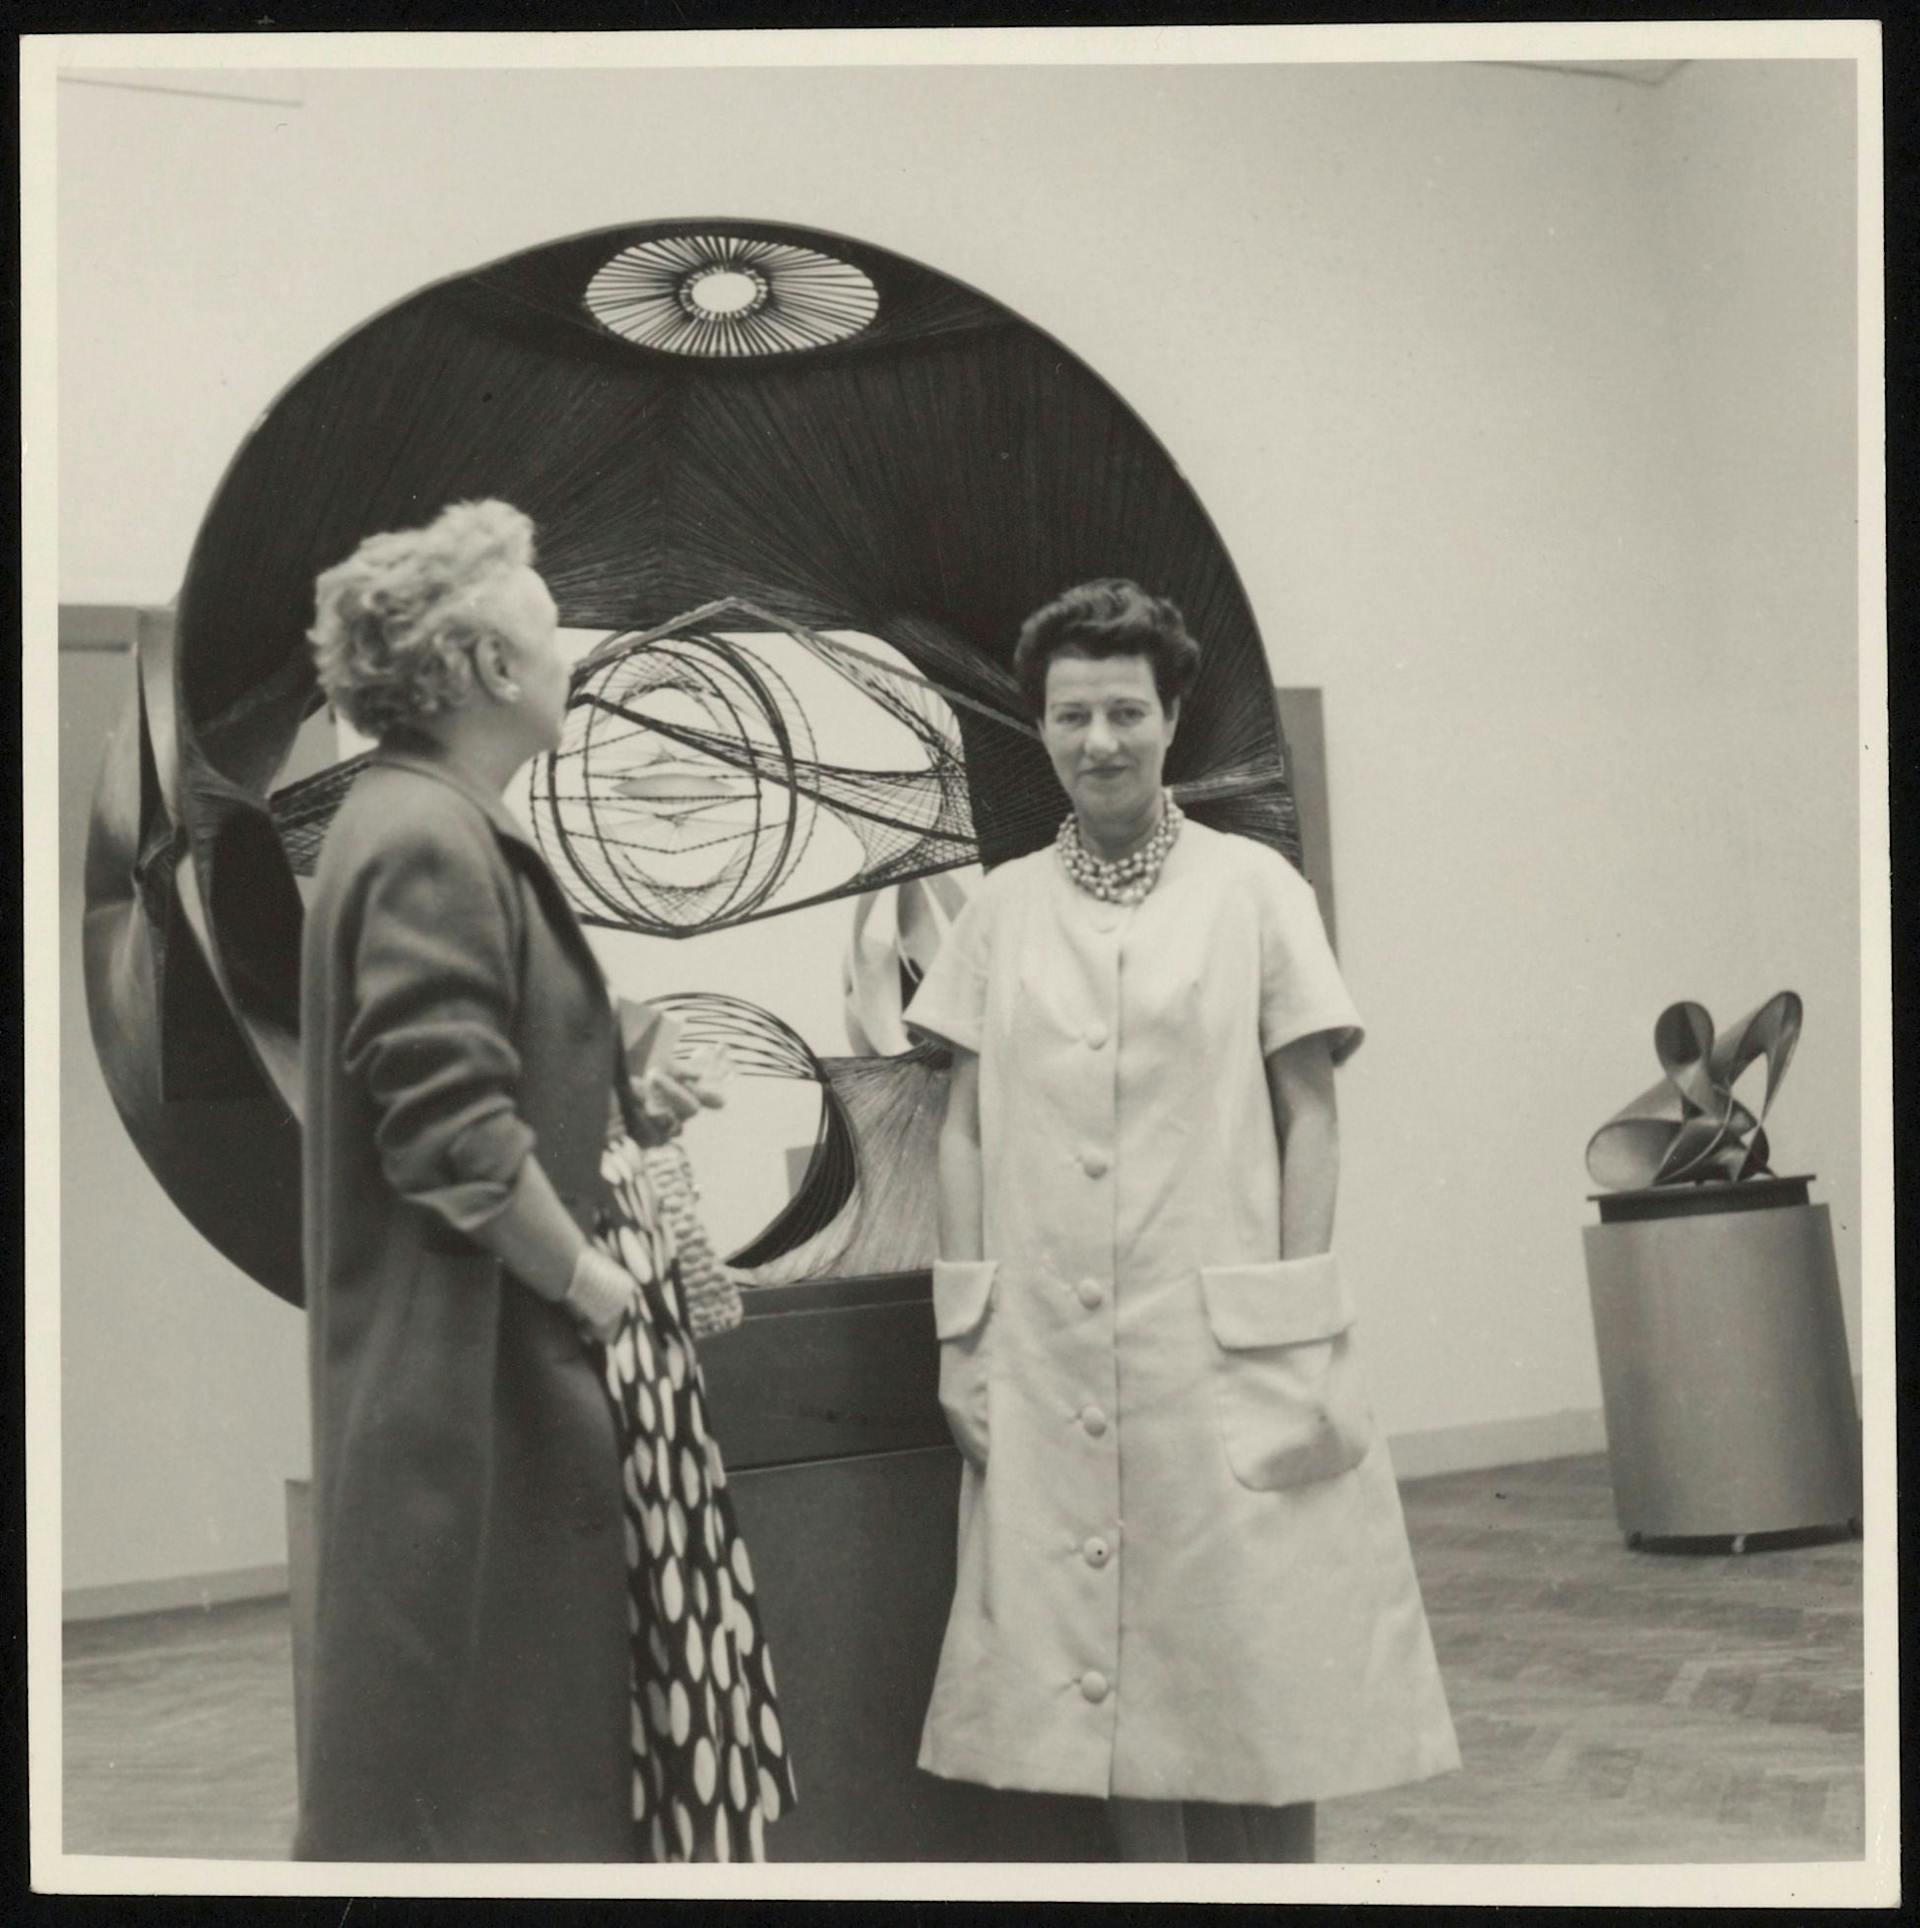 Nelly van Doesburg and Peggy Guggenheim in an exhibition gallery during the Venice Biennale. Collection RKD. Archive Theo and Nelly van Doesburg. 